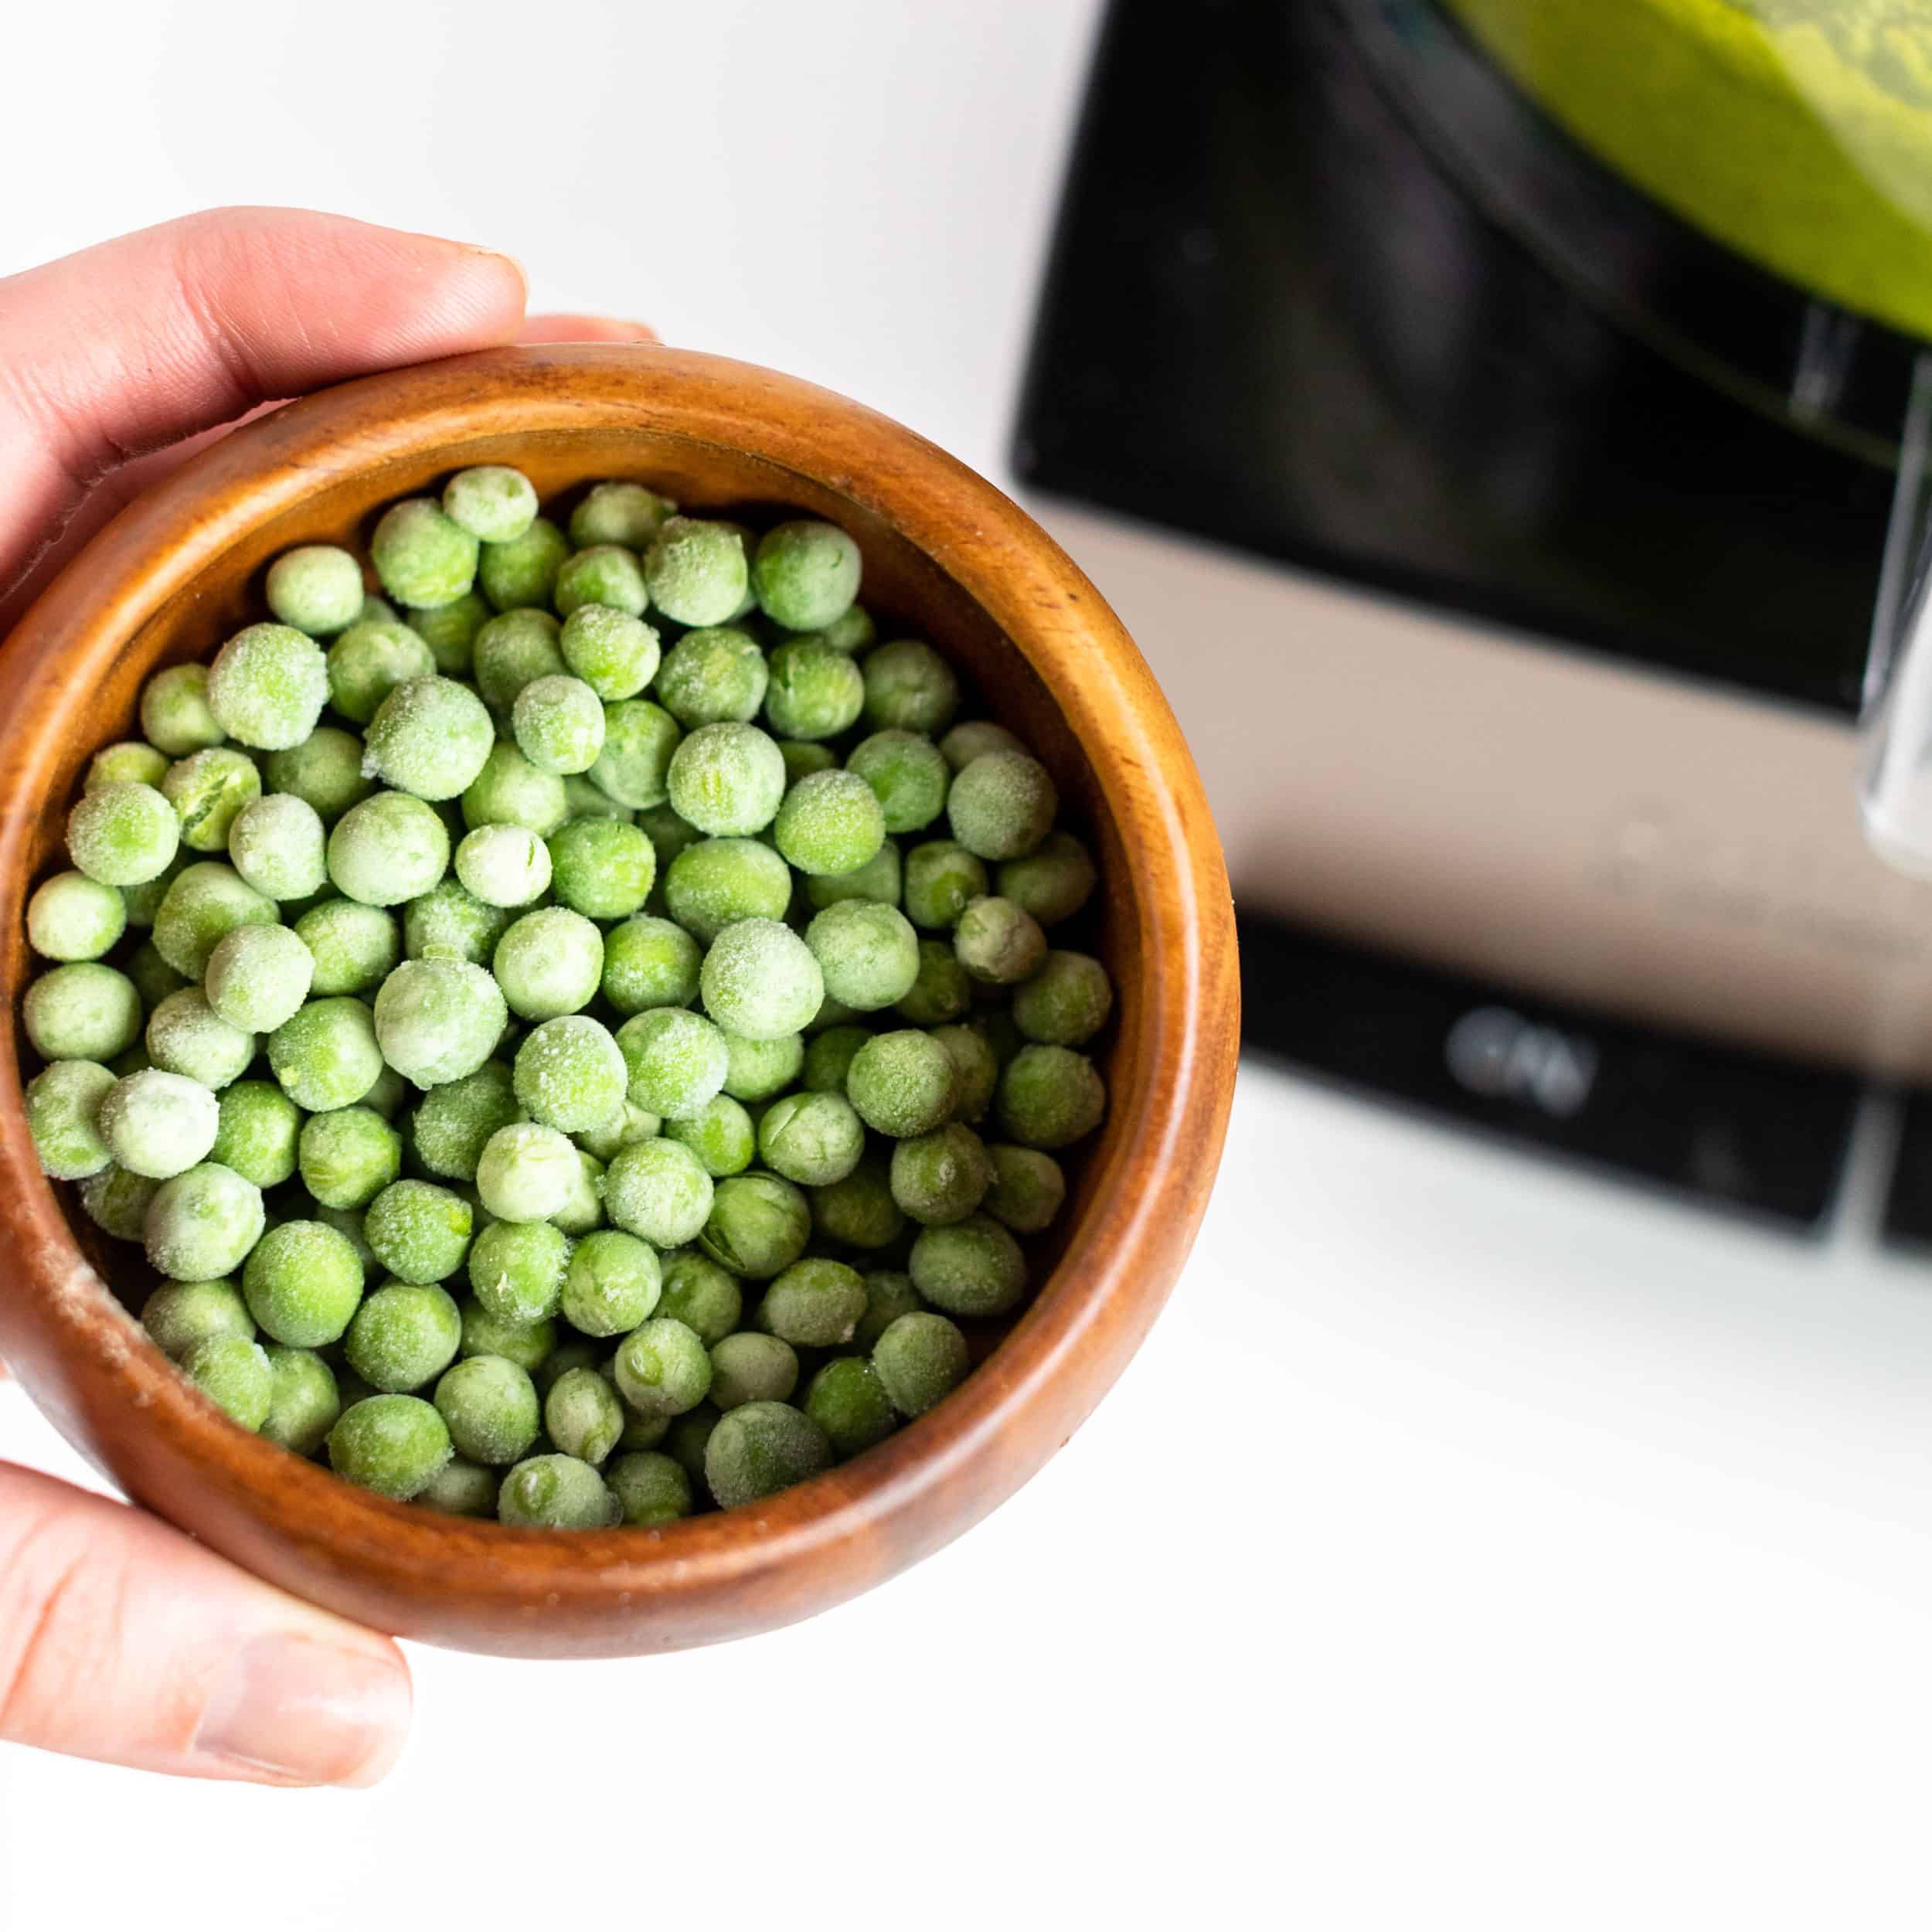 Close up image of frozen peas in a small wooden bowl with food processor in background to add to Fresh Basil Pesto sauce with Toasted Breadcrumbs. Frozen peas will be added to the rest of pesto ingredients. #pestopasta #easyrecipes #fusilli #greenrecipes #weeknightrecipes #pastadish #pasta #breadcrumbs #massimobottura #bingeworthybites